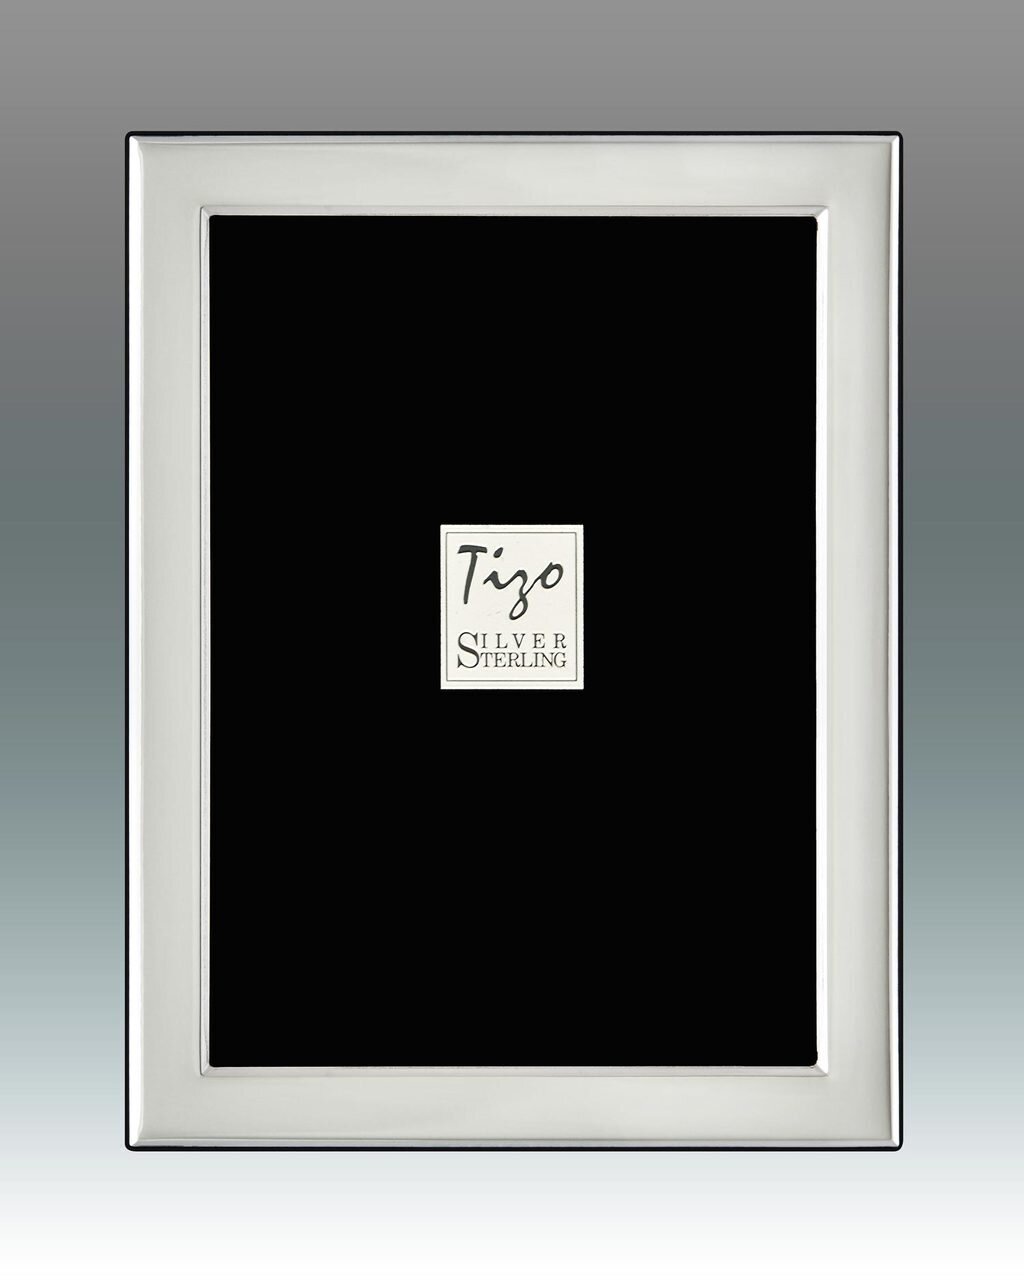 Tizo Simply Schick Sterling Silver Picture Frame 5 x 7 Inch